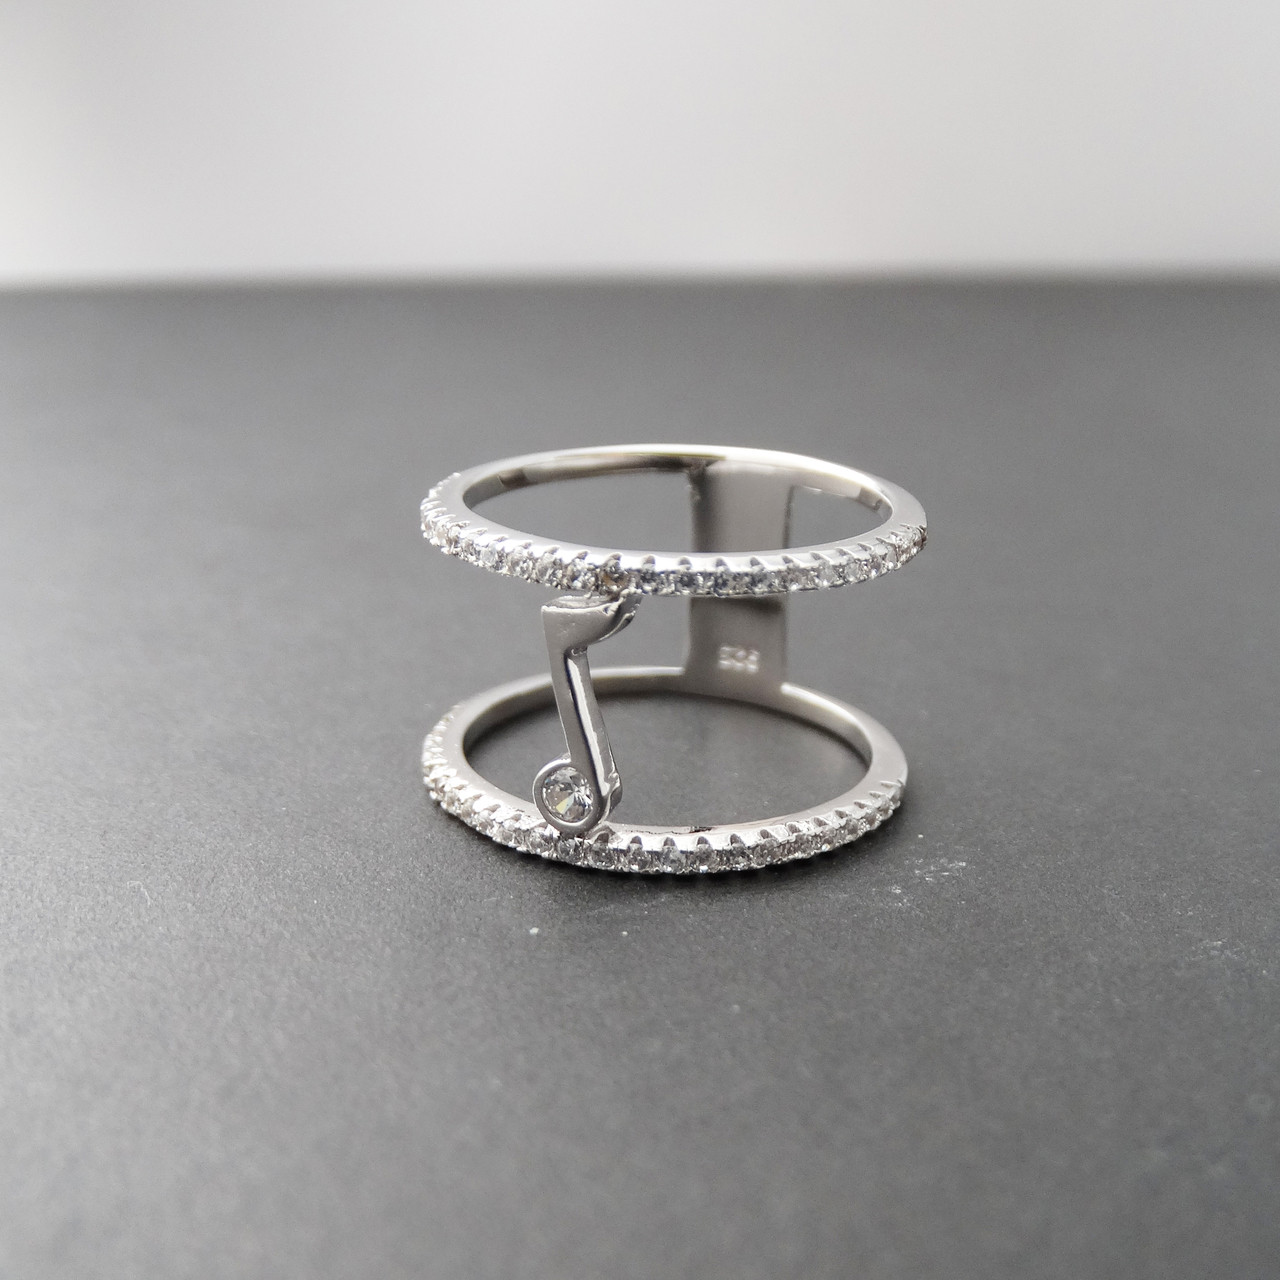 Sterling Silver Double Band Music Note Ring | FashionJunkie4Life.com